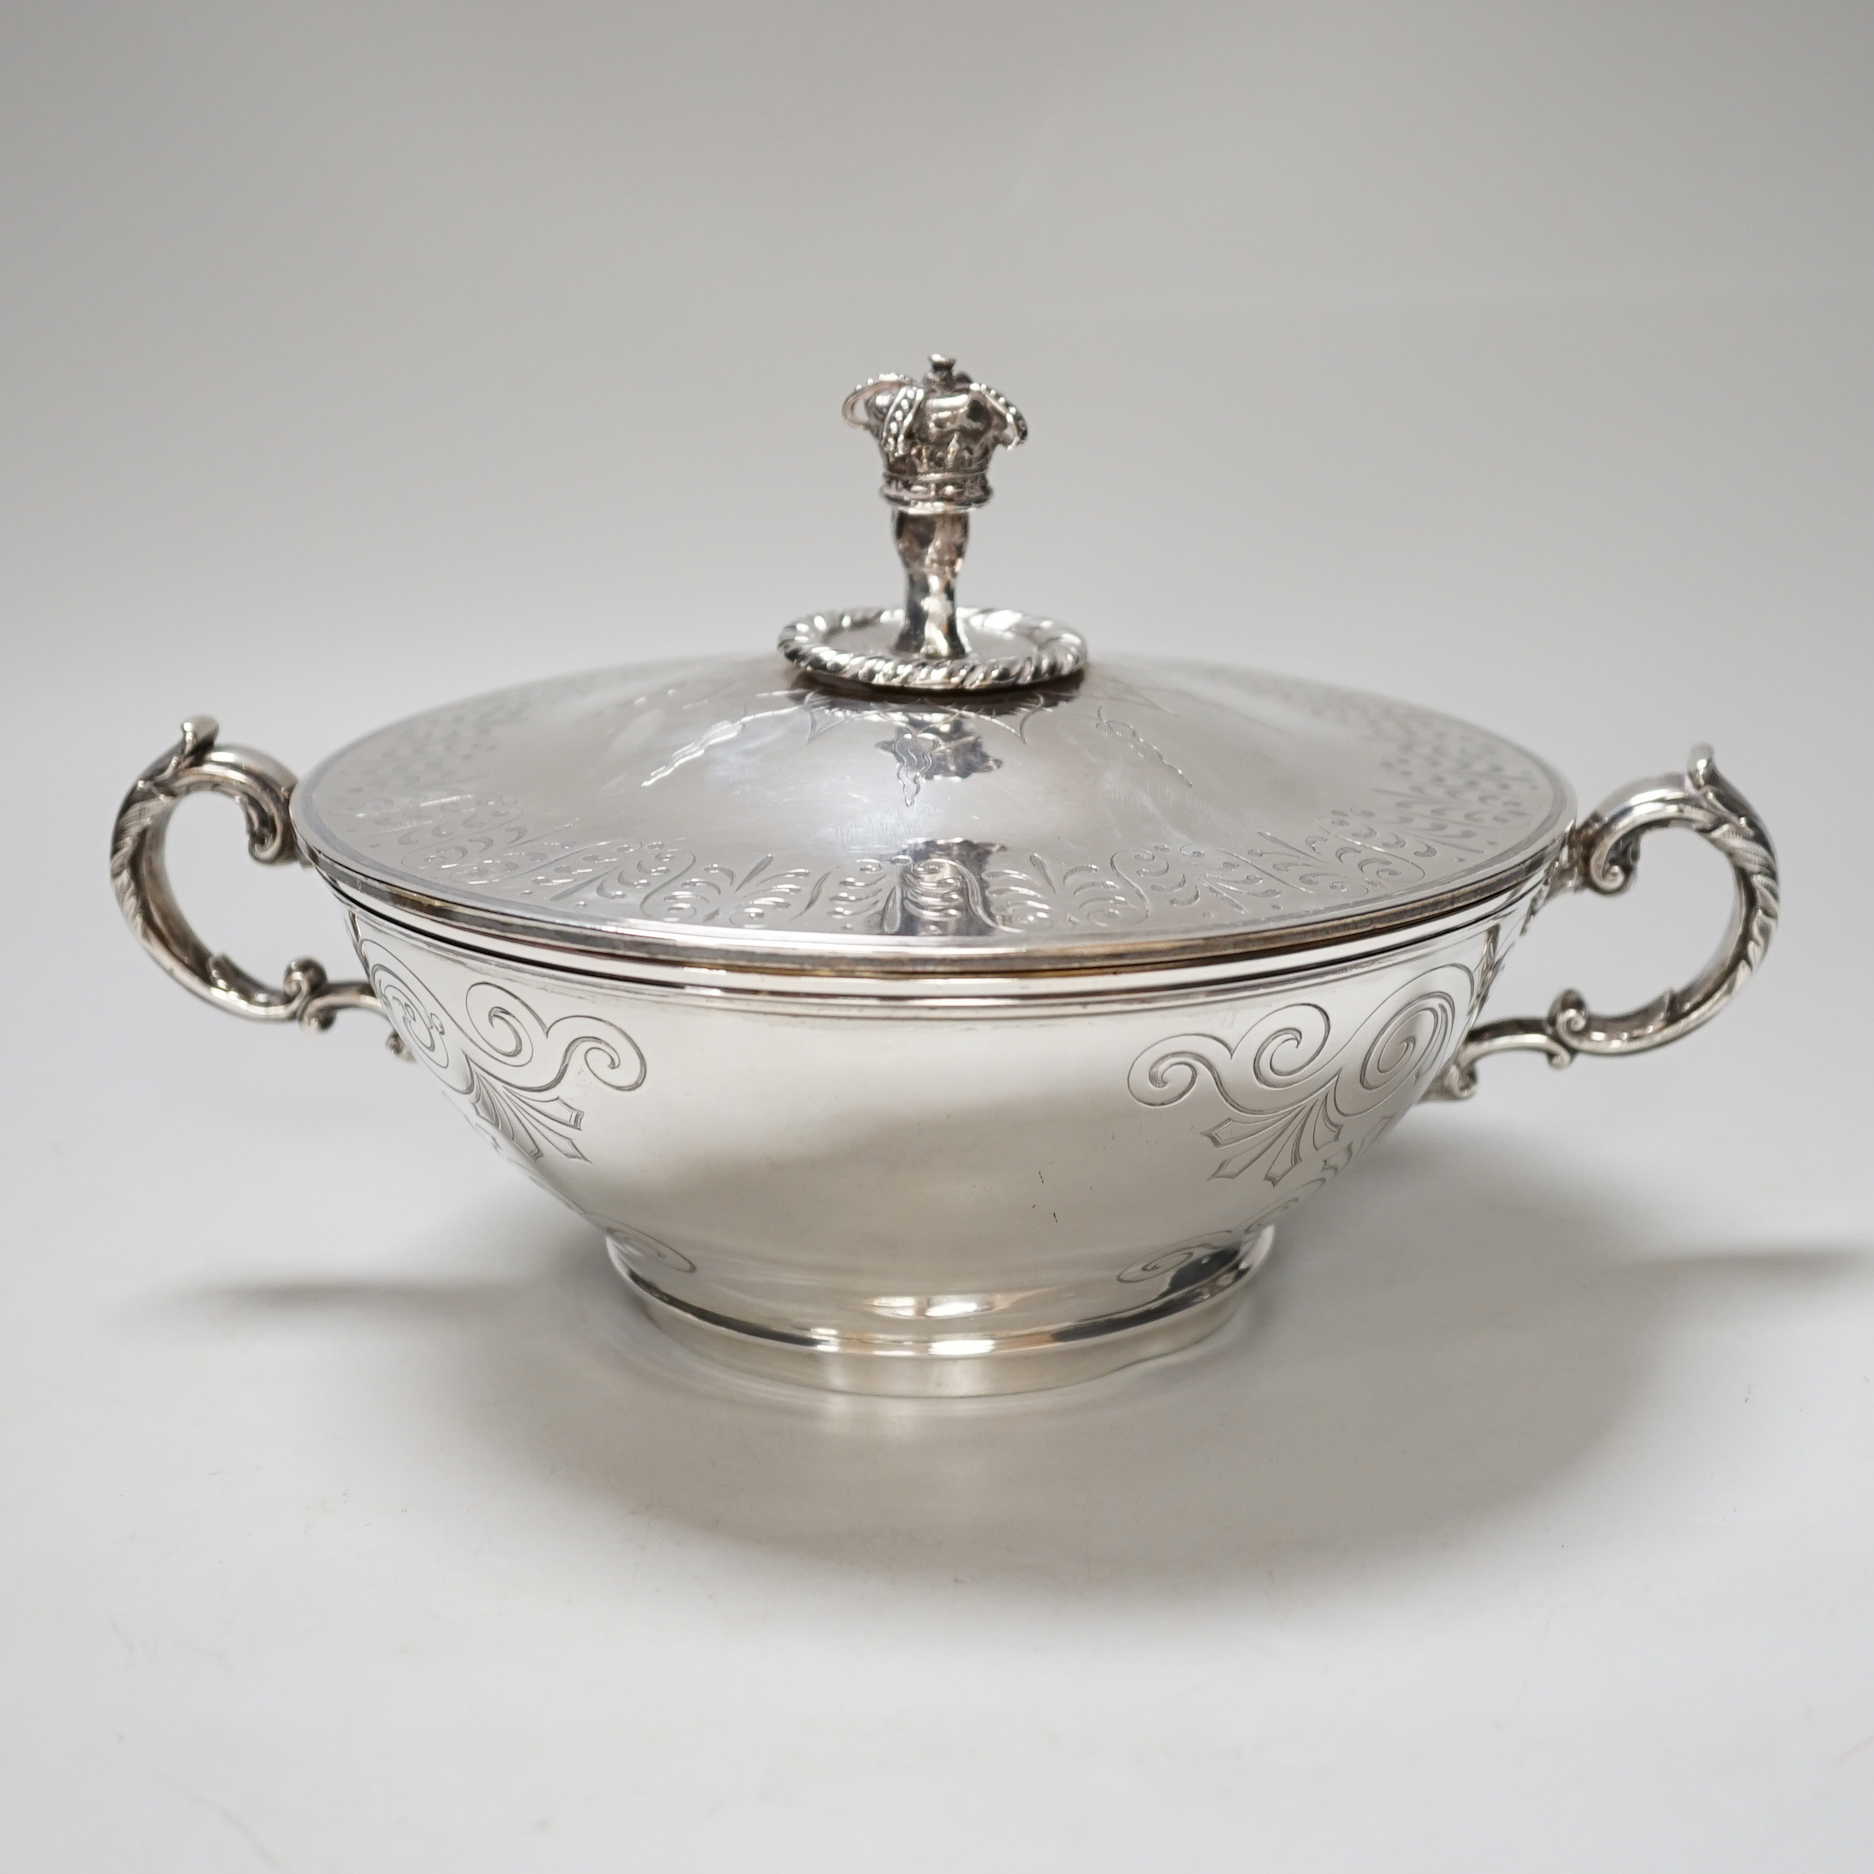 A Victorian silver tureen and cover, with hand holding crown finial and stylised anthemion engravings, makers initials W.T, London 1867, 23cm over handle, 673 grams